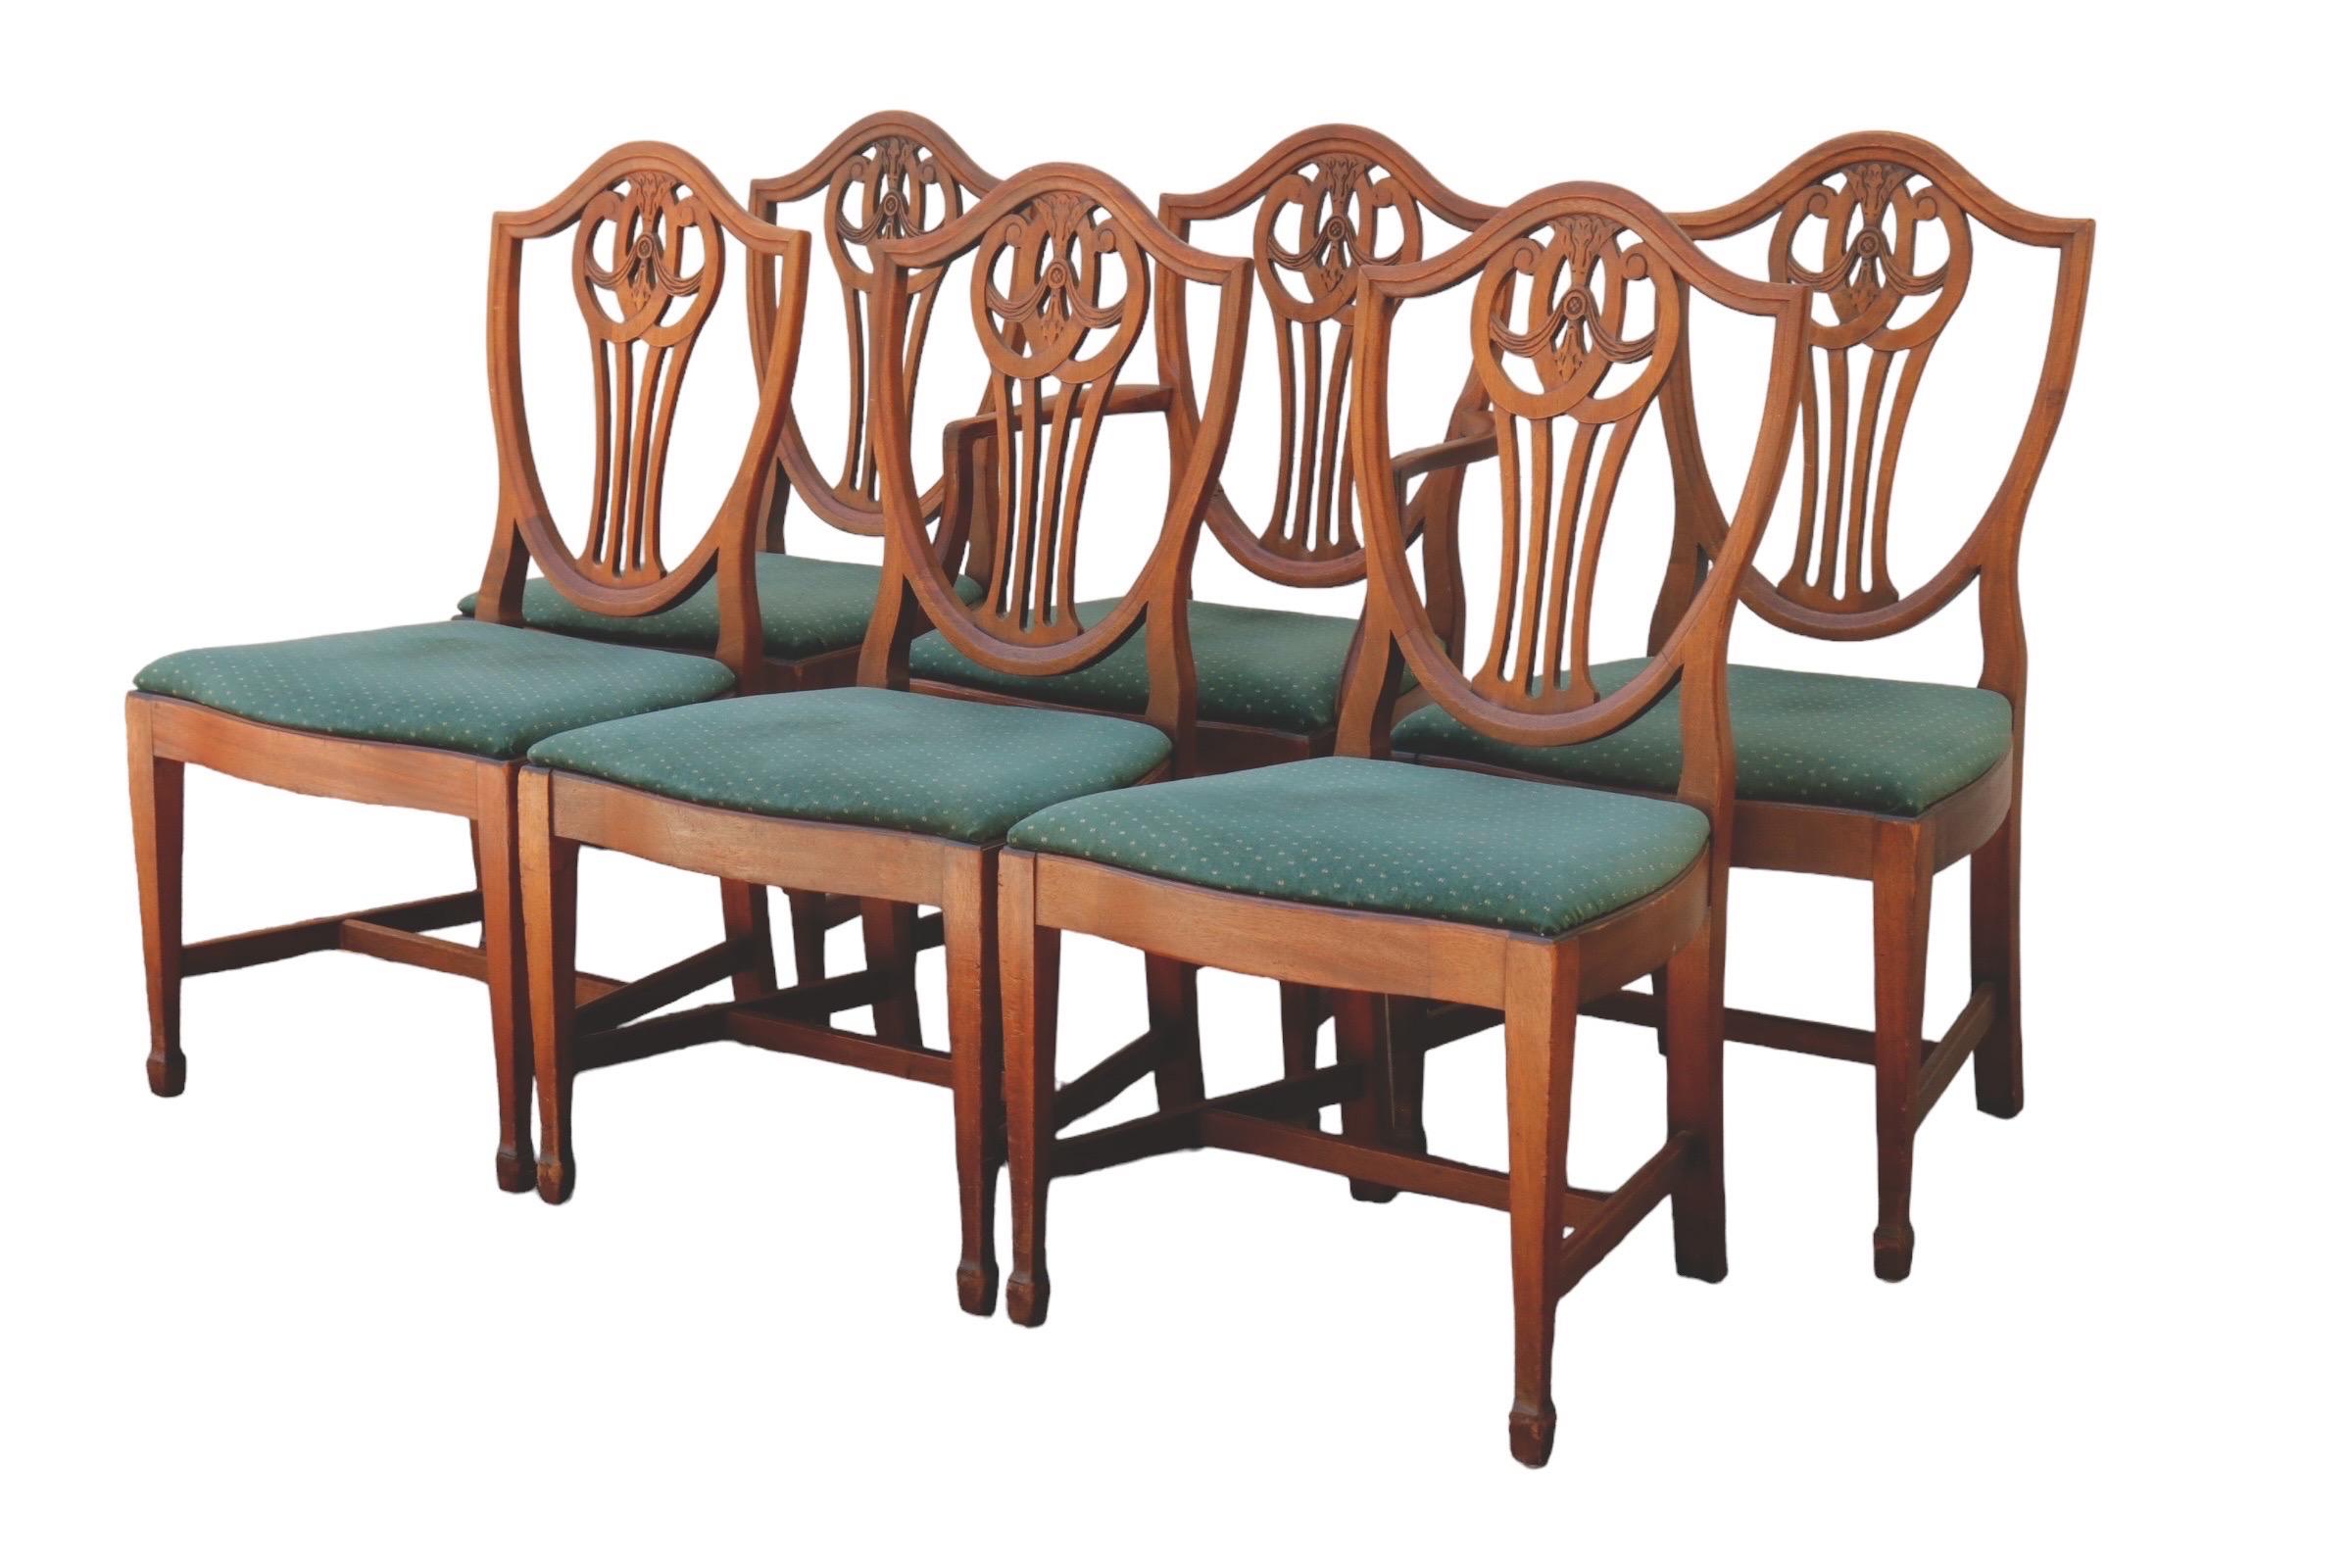 A set of six shield back dining chairs (five side chairs and one armchair) made in the 1930’s by Macy’s of New York. Shield shaped seat backs are beveled, with a pierced back splat simply carved with scrolls and swag details. Trapezoid shaped seats